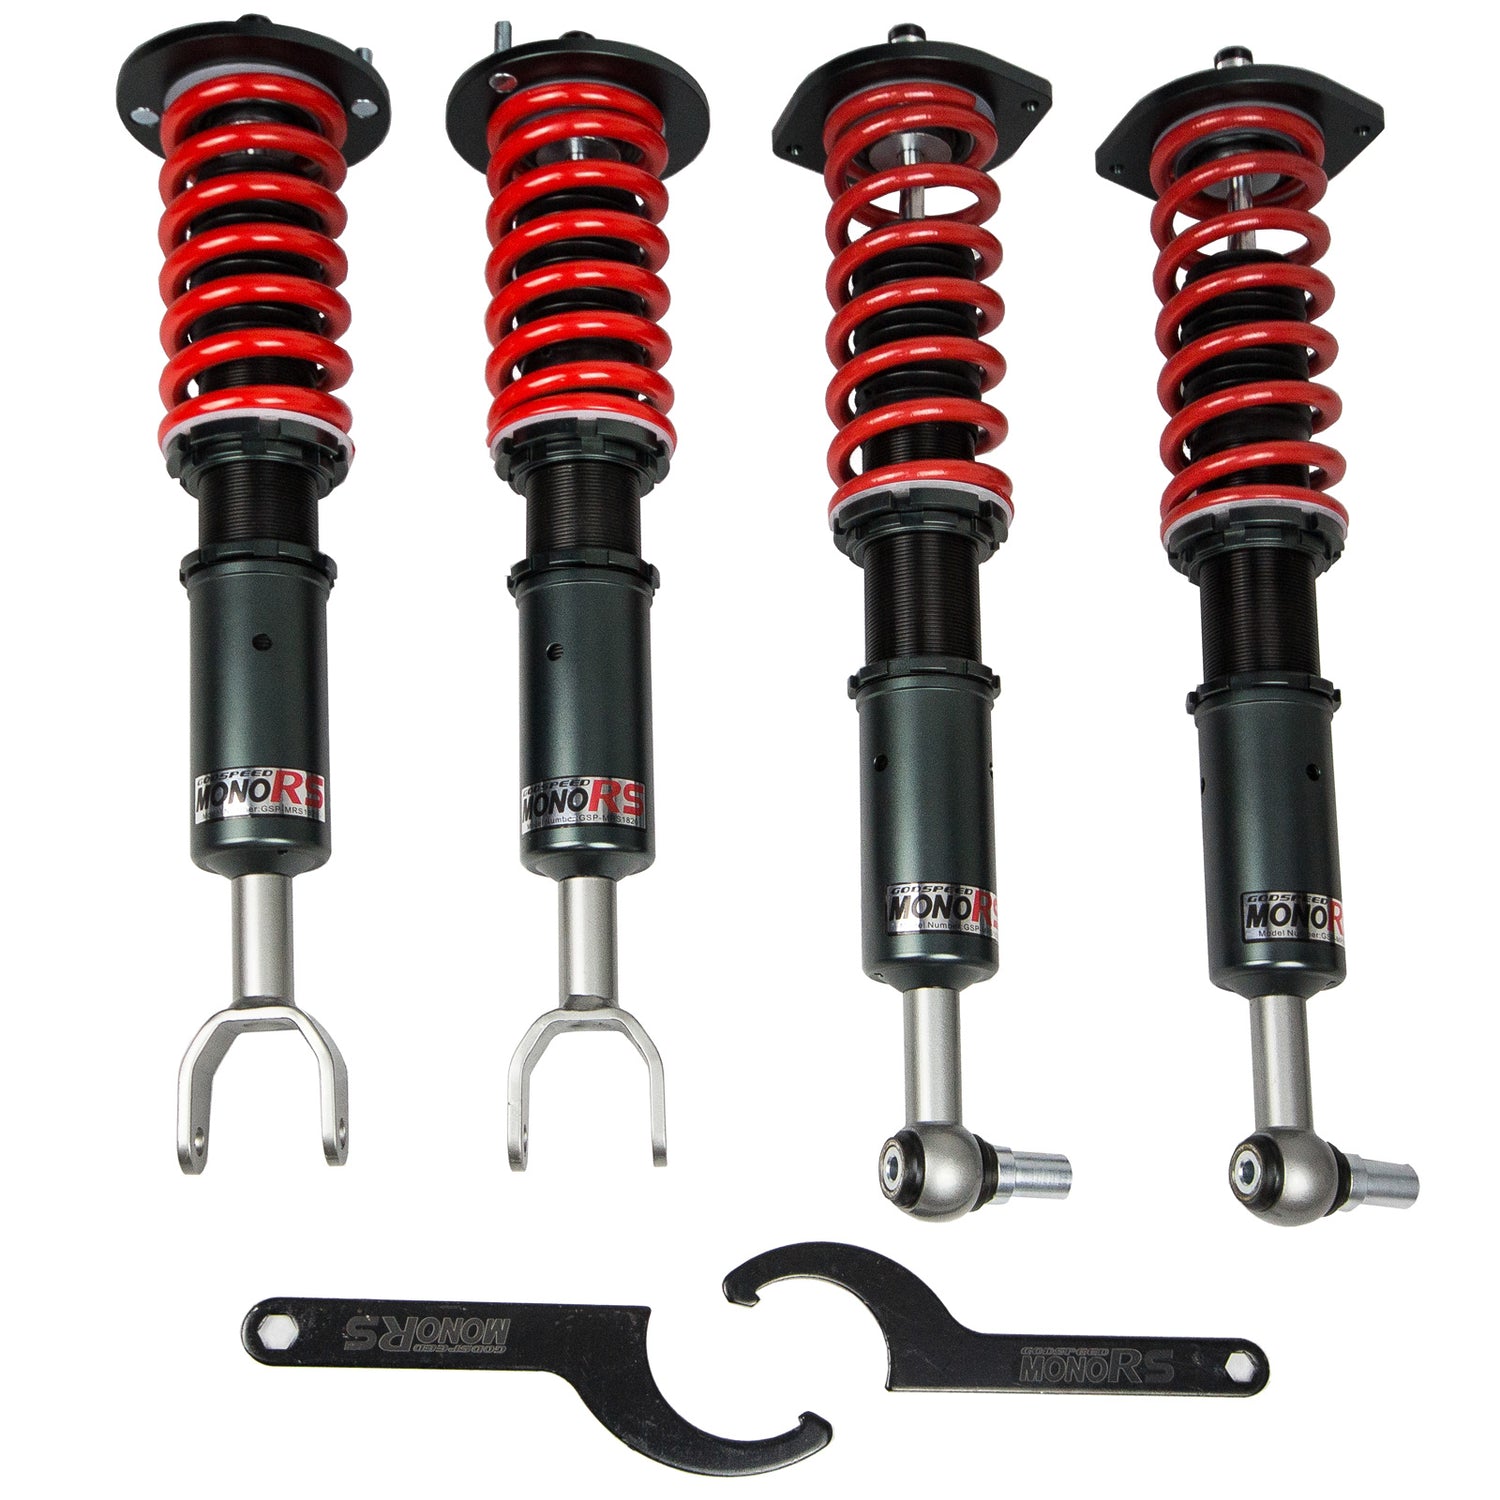 Godspeed MRS1820 MonoRS Coilover Lowering Kit, 32 Damping Adjustment, Ride Height Adjustable